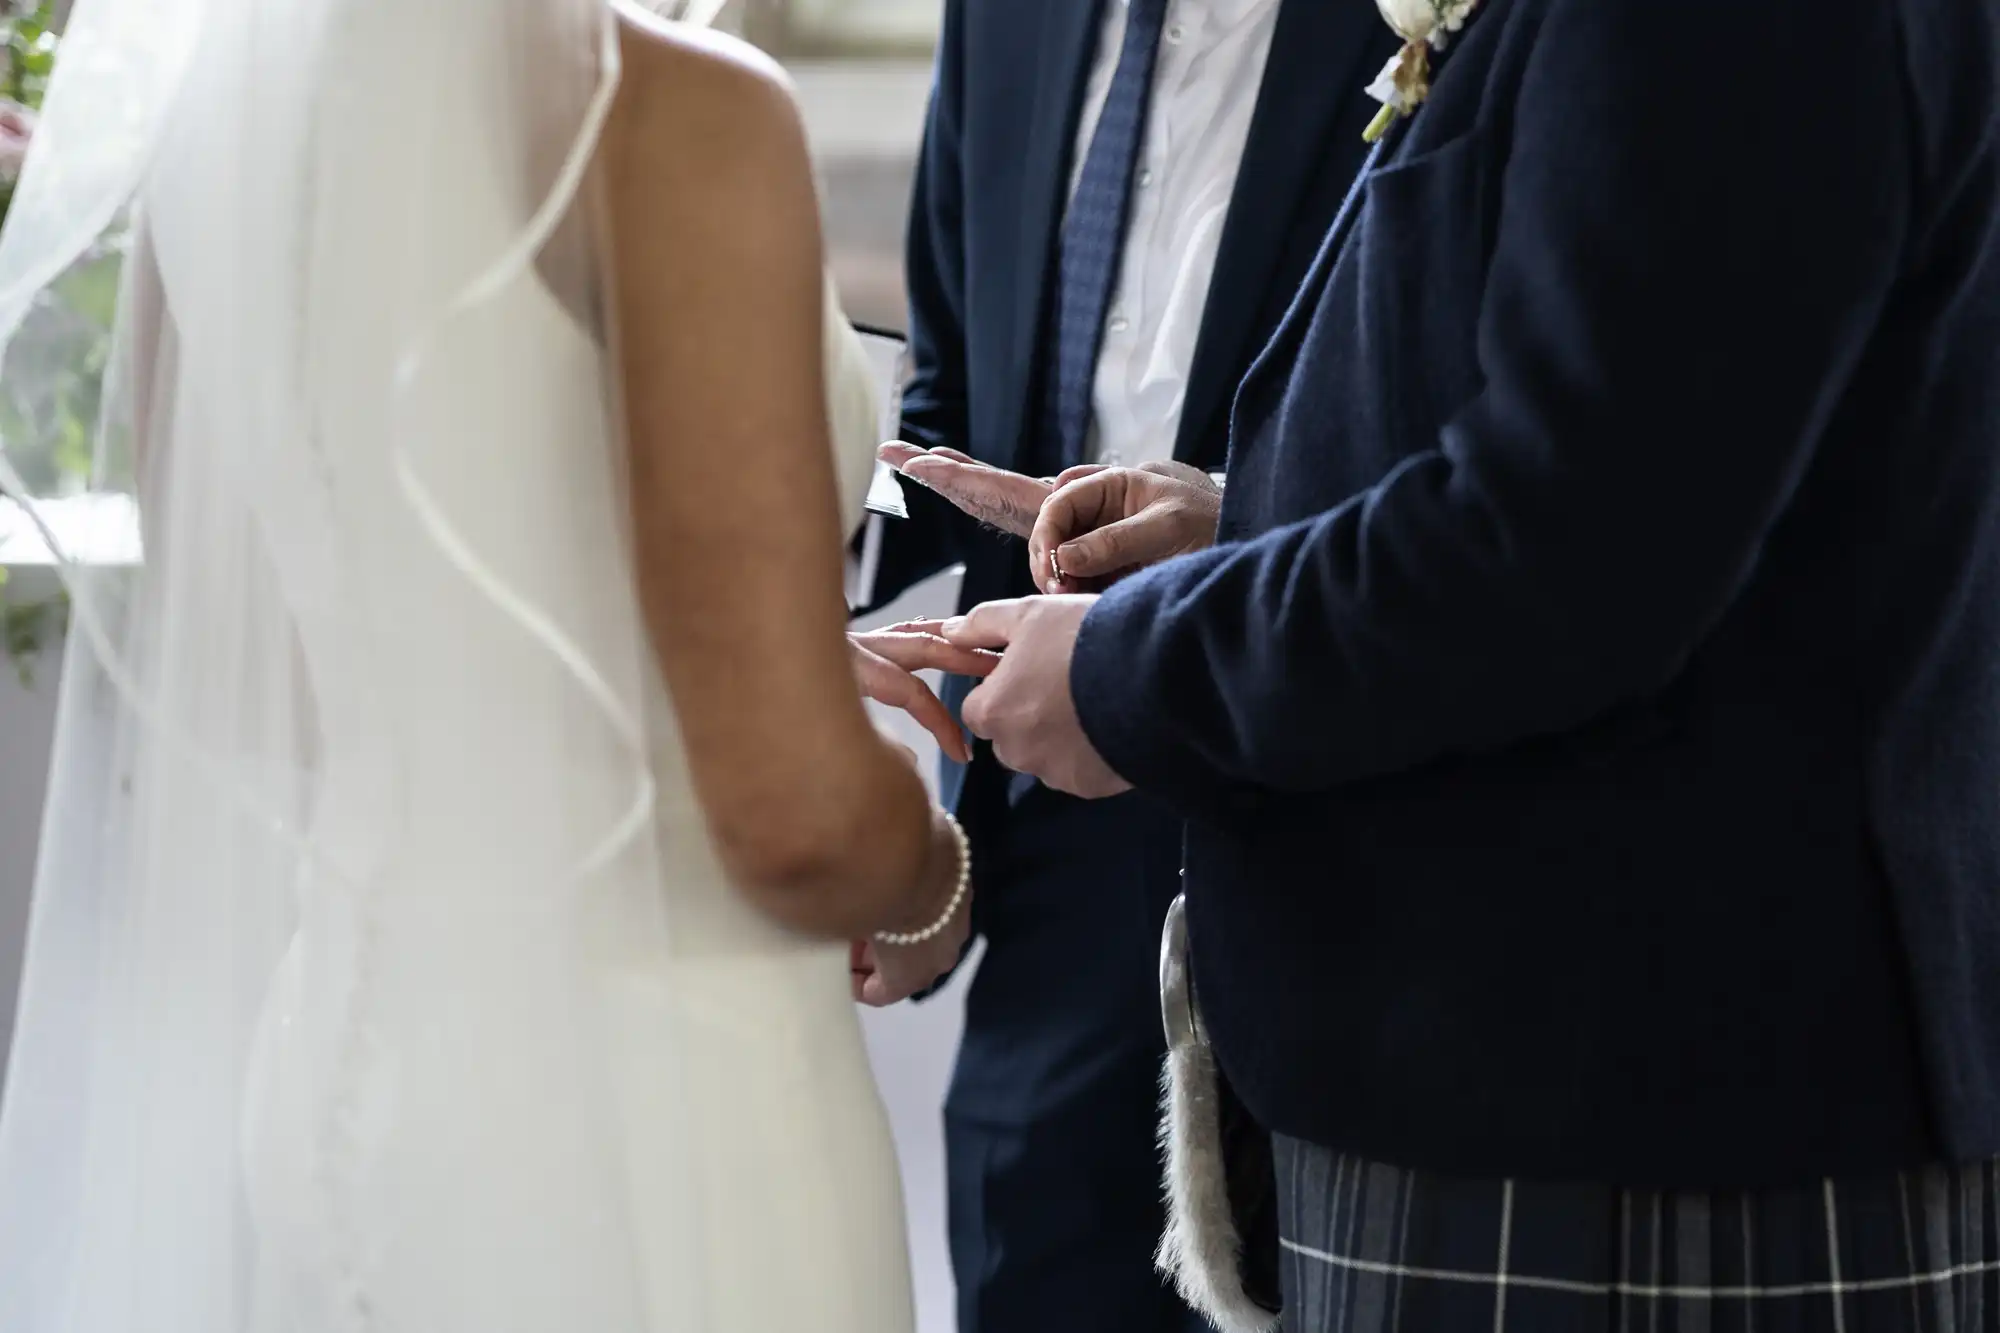 A bride and groom exchange rings during a wedding ceremony, with the groom wearing a kilt and the bride in a white gown.